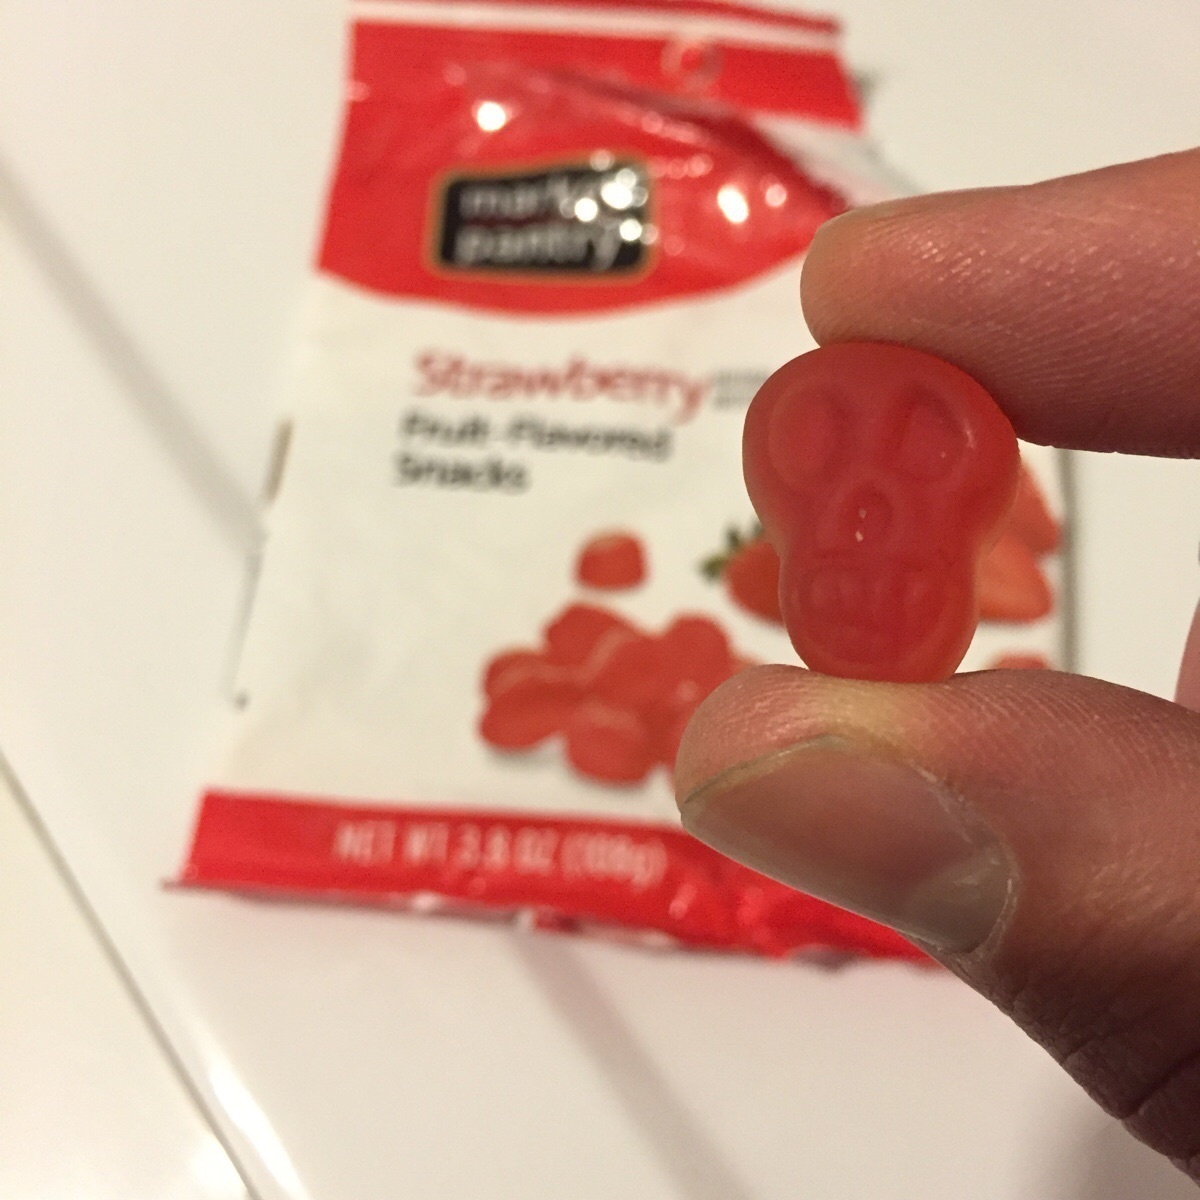 The strawberry fruit snack that looks like a skull.